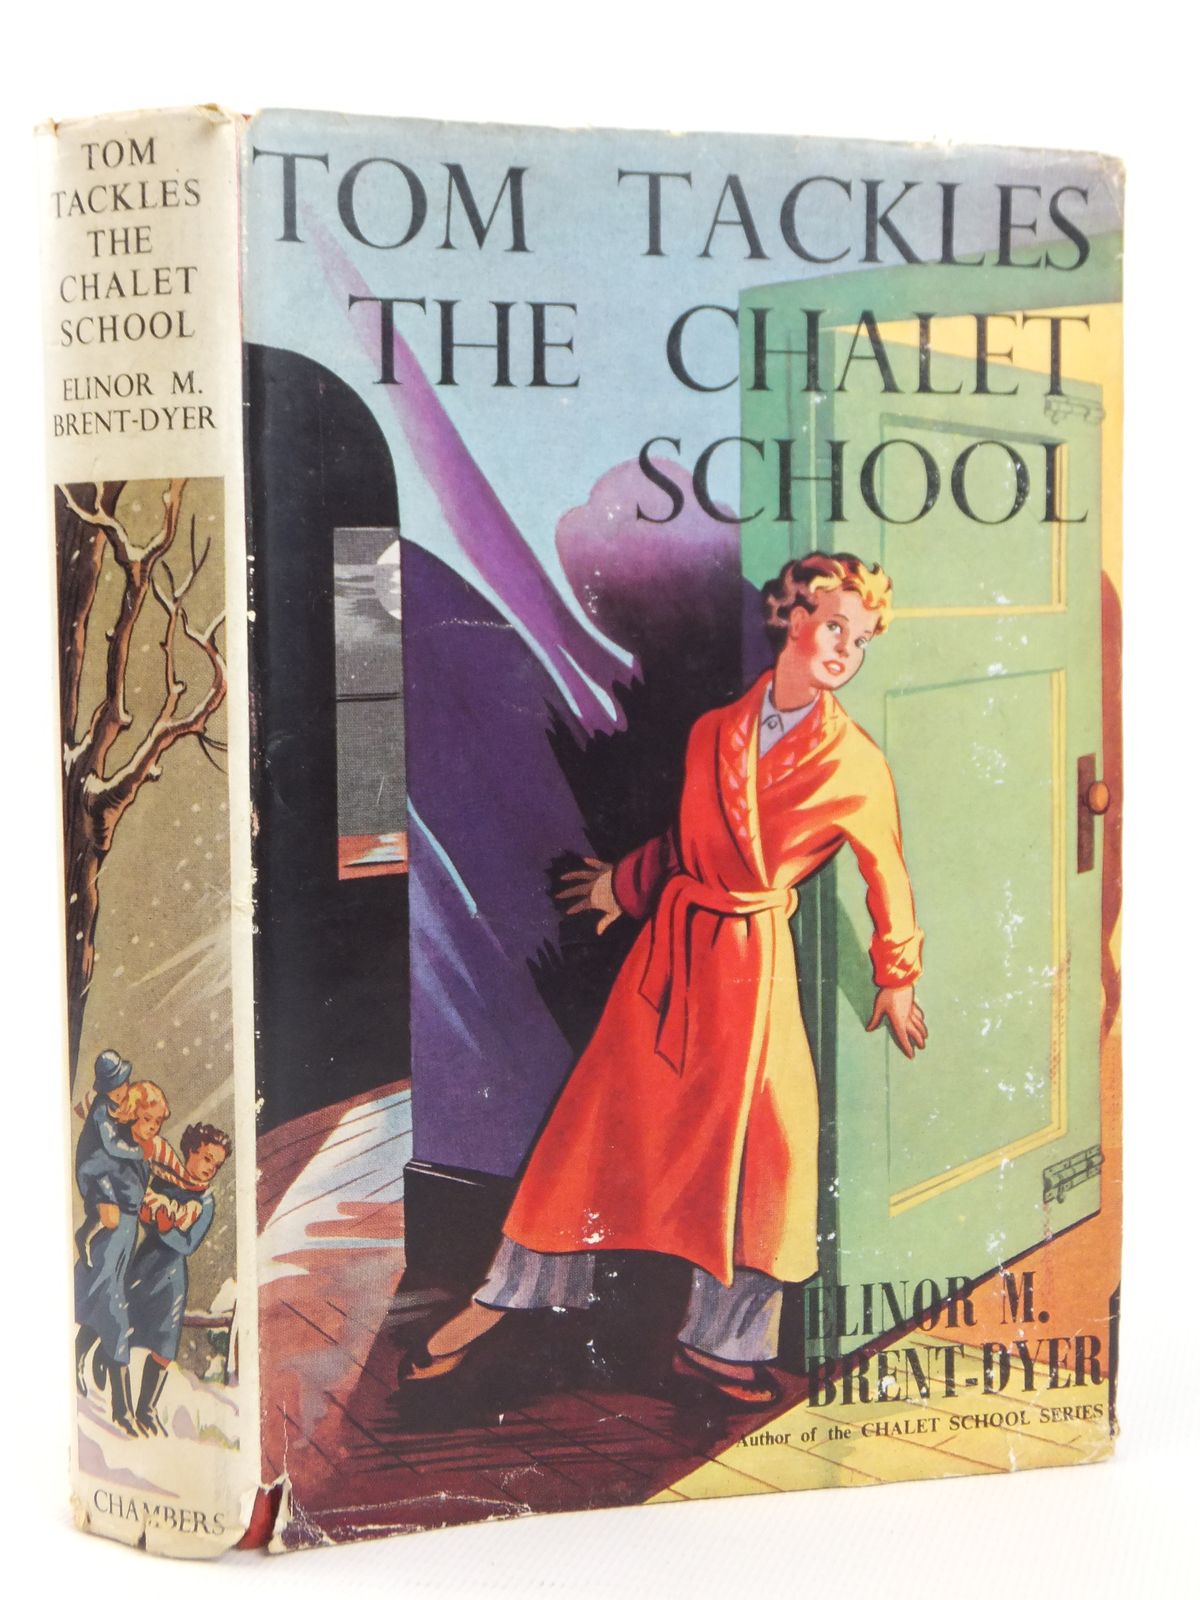 Photo of TOM TACKLES THE CHALET SCHOOL written by Brent-Dyer, Elinor M. published by W. & R. Chambers Limited (STOCK CODE: 2122167)  for sale by Stella & Rose's Books